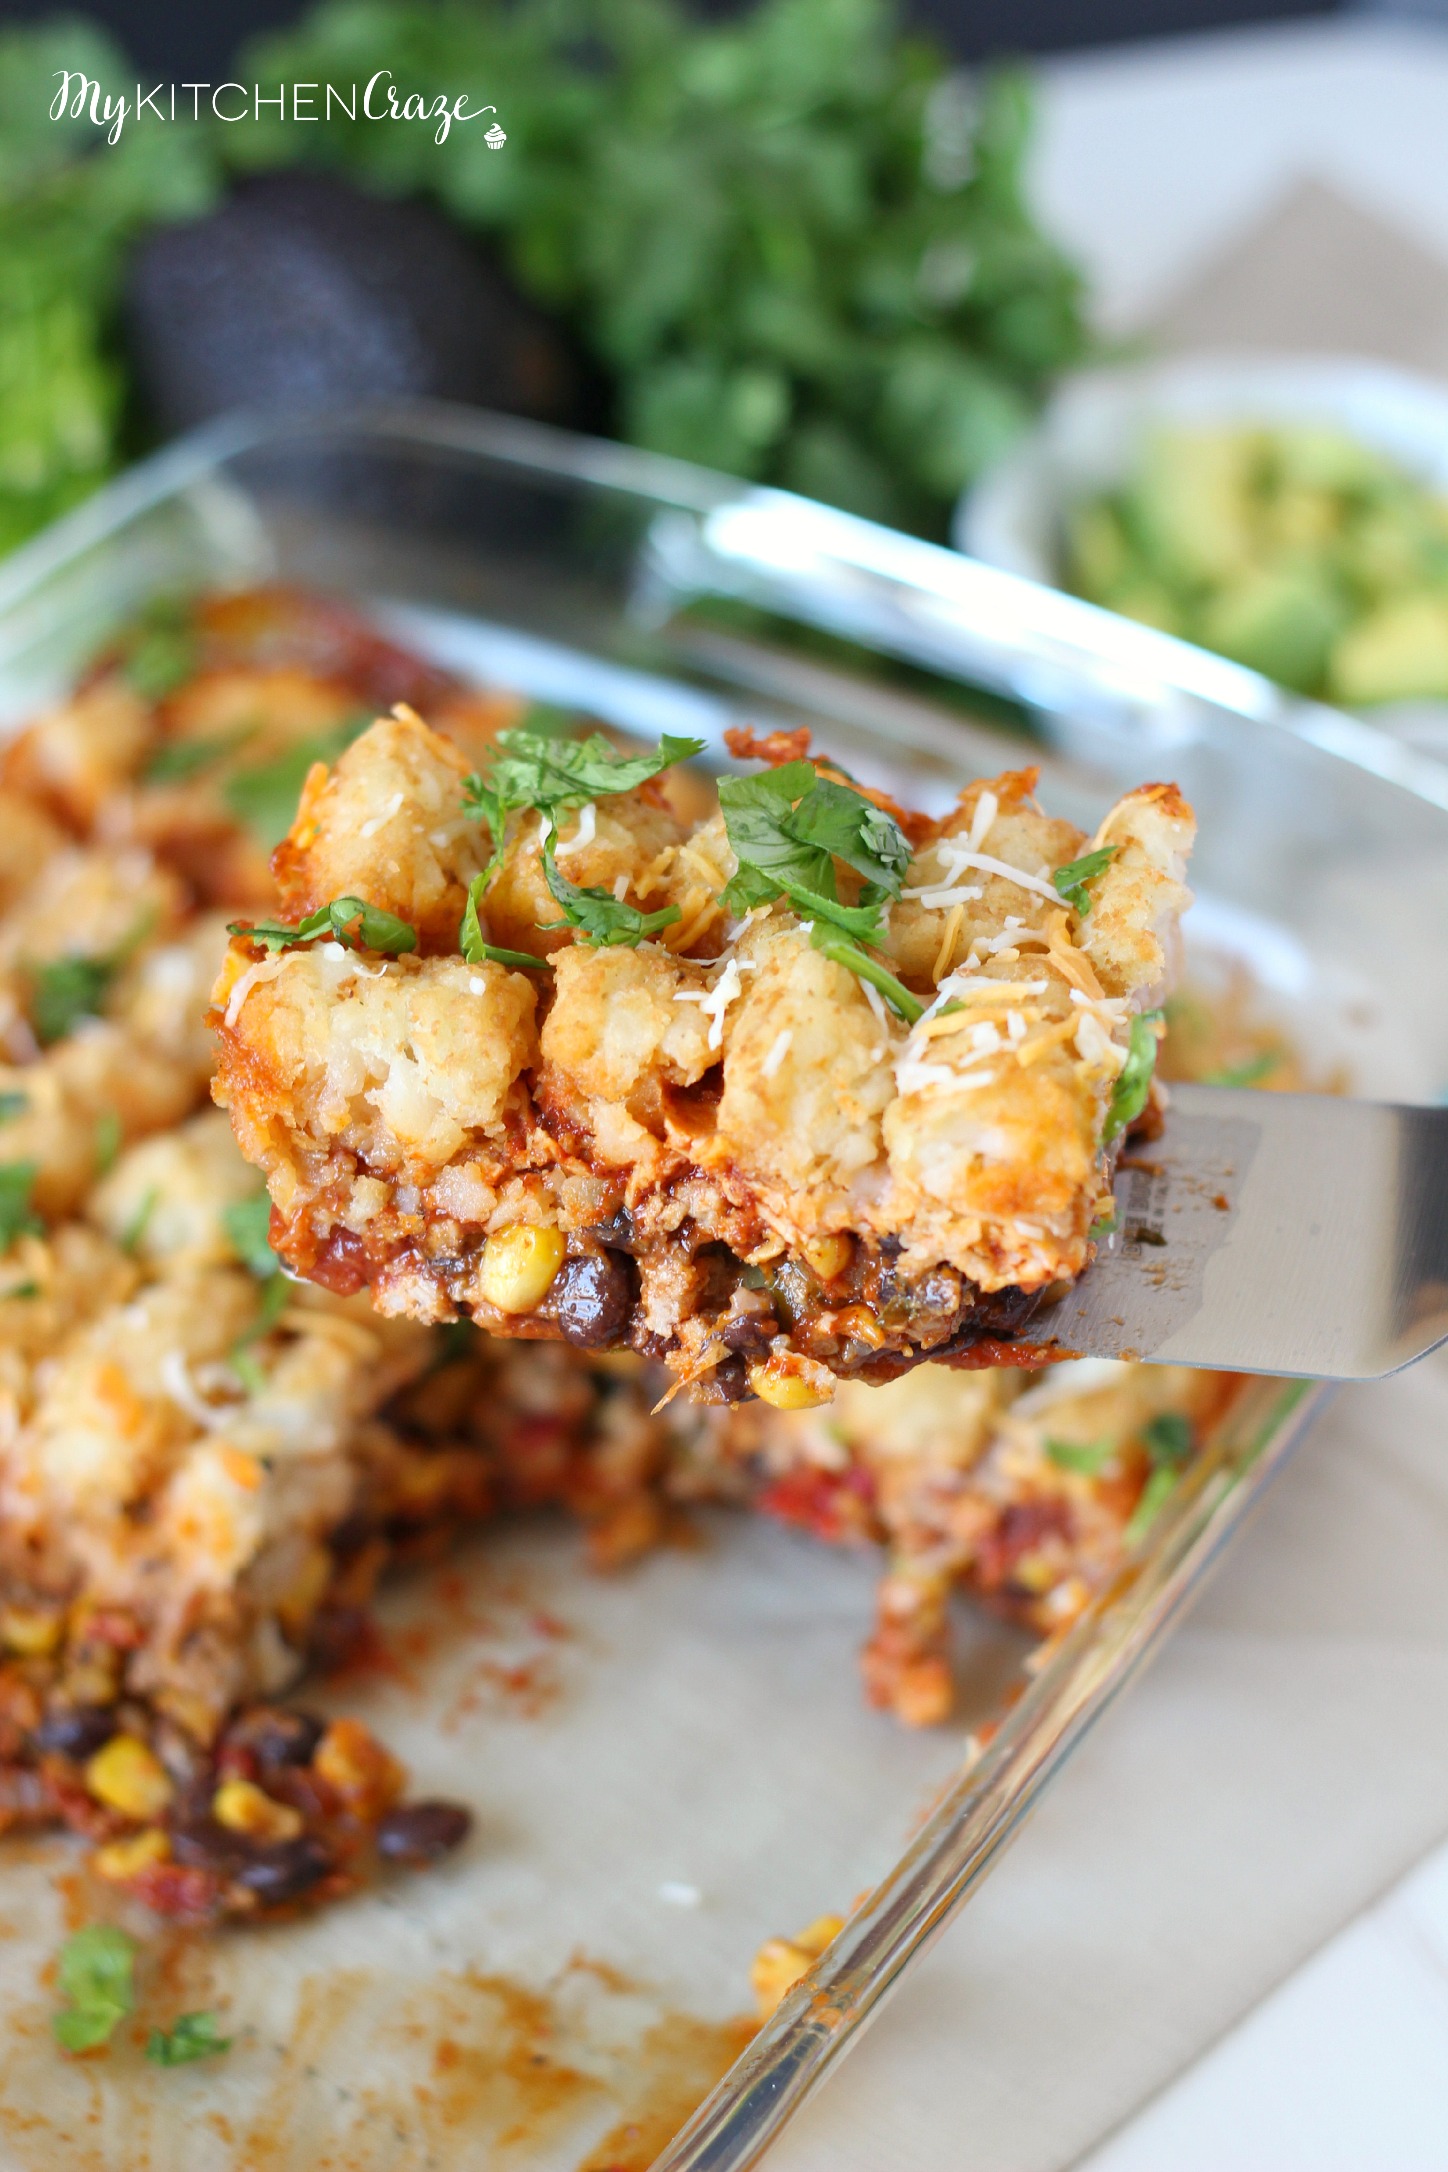 Tater Tot Taco Casserole ~ mykitchencraze.com ~ A delicious taco casserole that's layered with crispy tater tots. Perfect dinner!